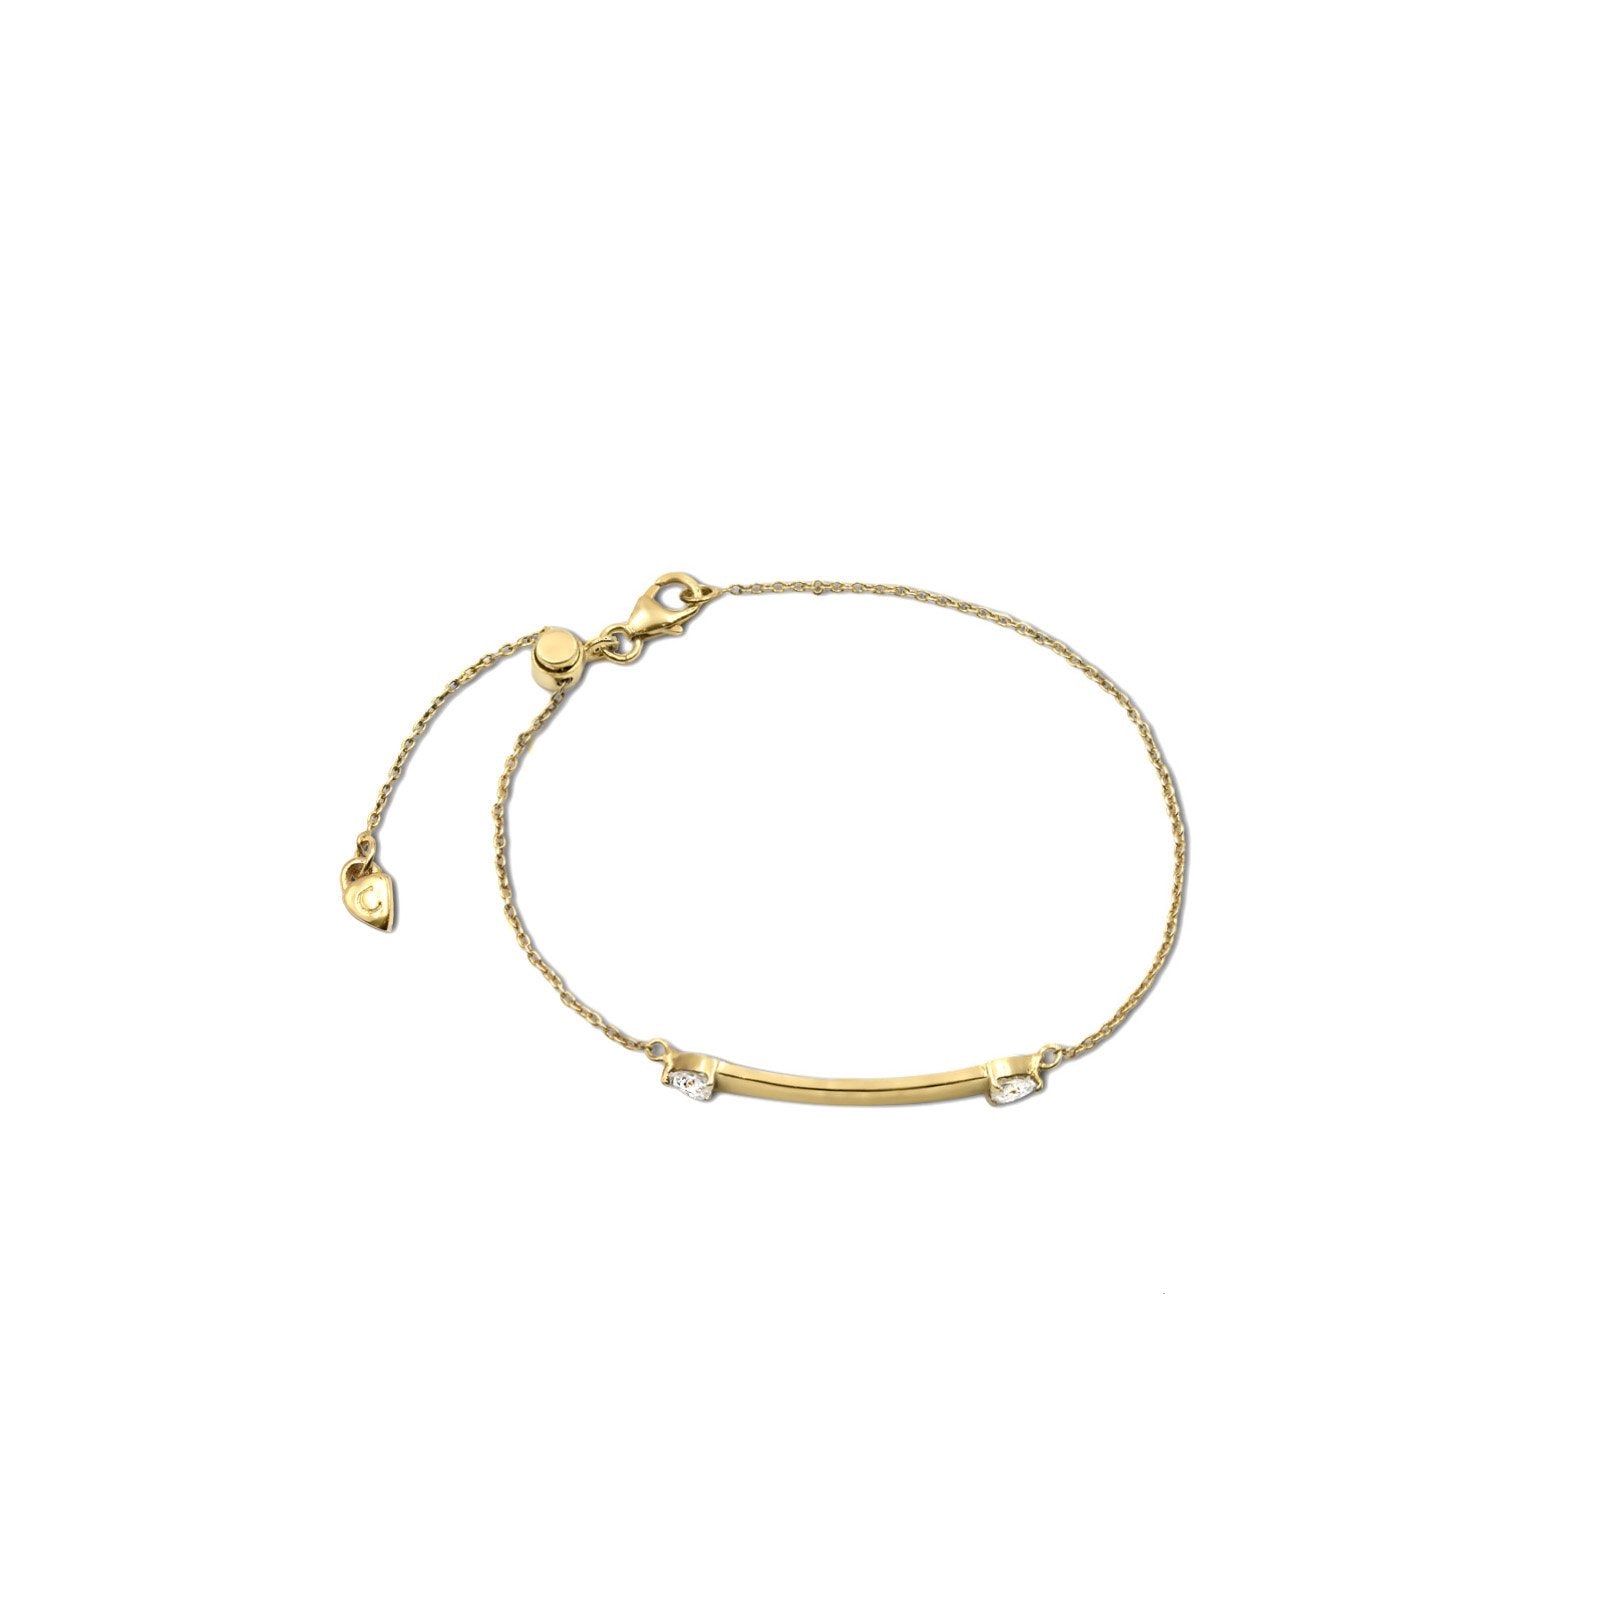 Theia - Vermeil & Sterling Silver Plaque Bracelet - Camille Jewelry